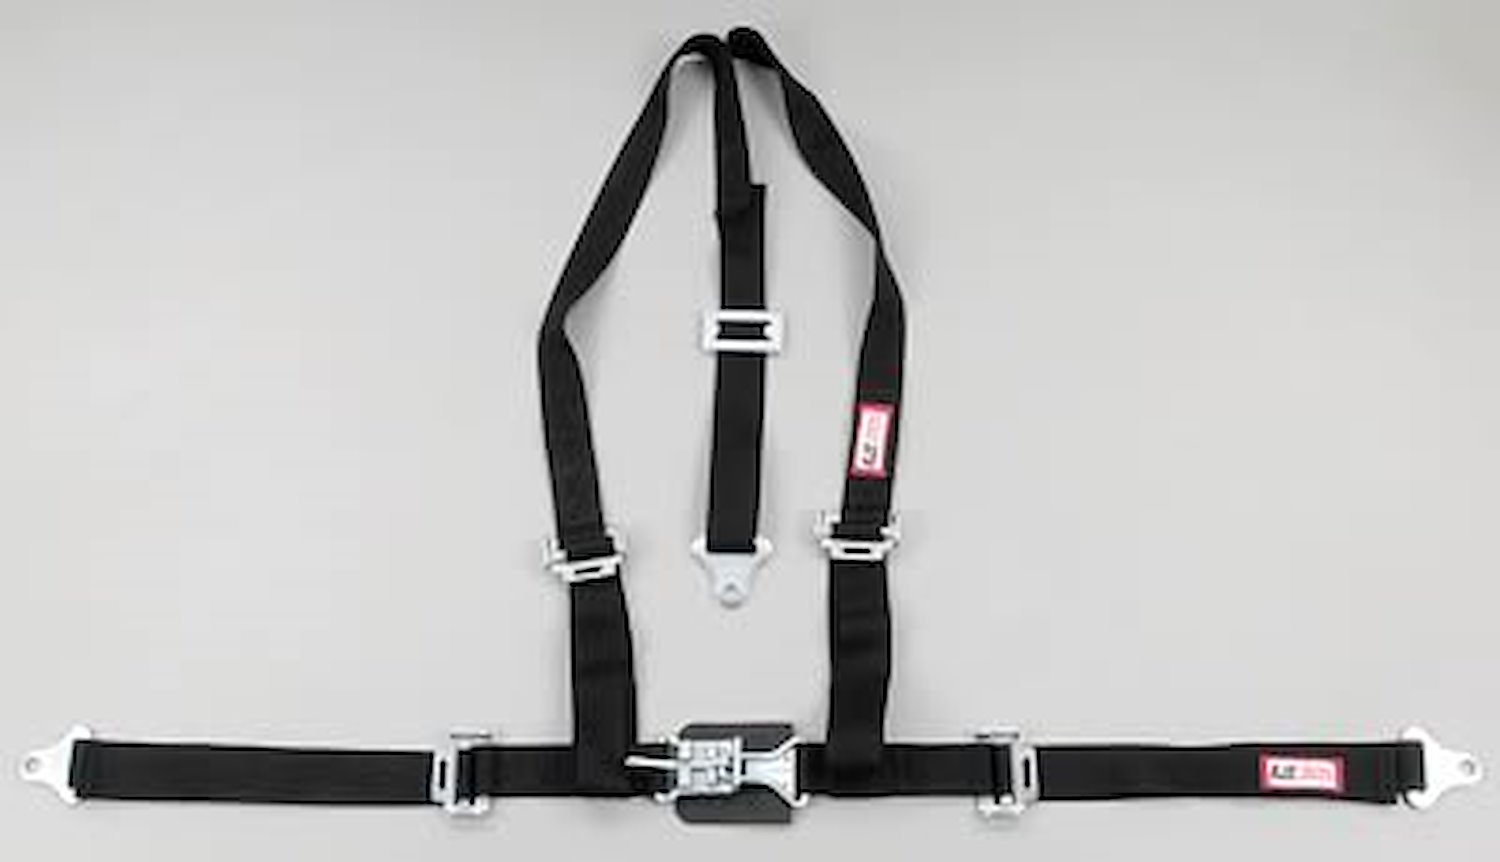 NON-SFI L&L HARNESS 2 PULL UP Lap Belt SEWN IN 2 S.H. Y FLOOR Mount w/STERNUM STRAP ALL WRAP ENDS KHAKI